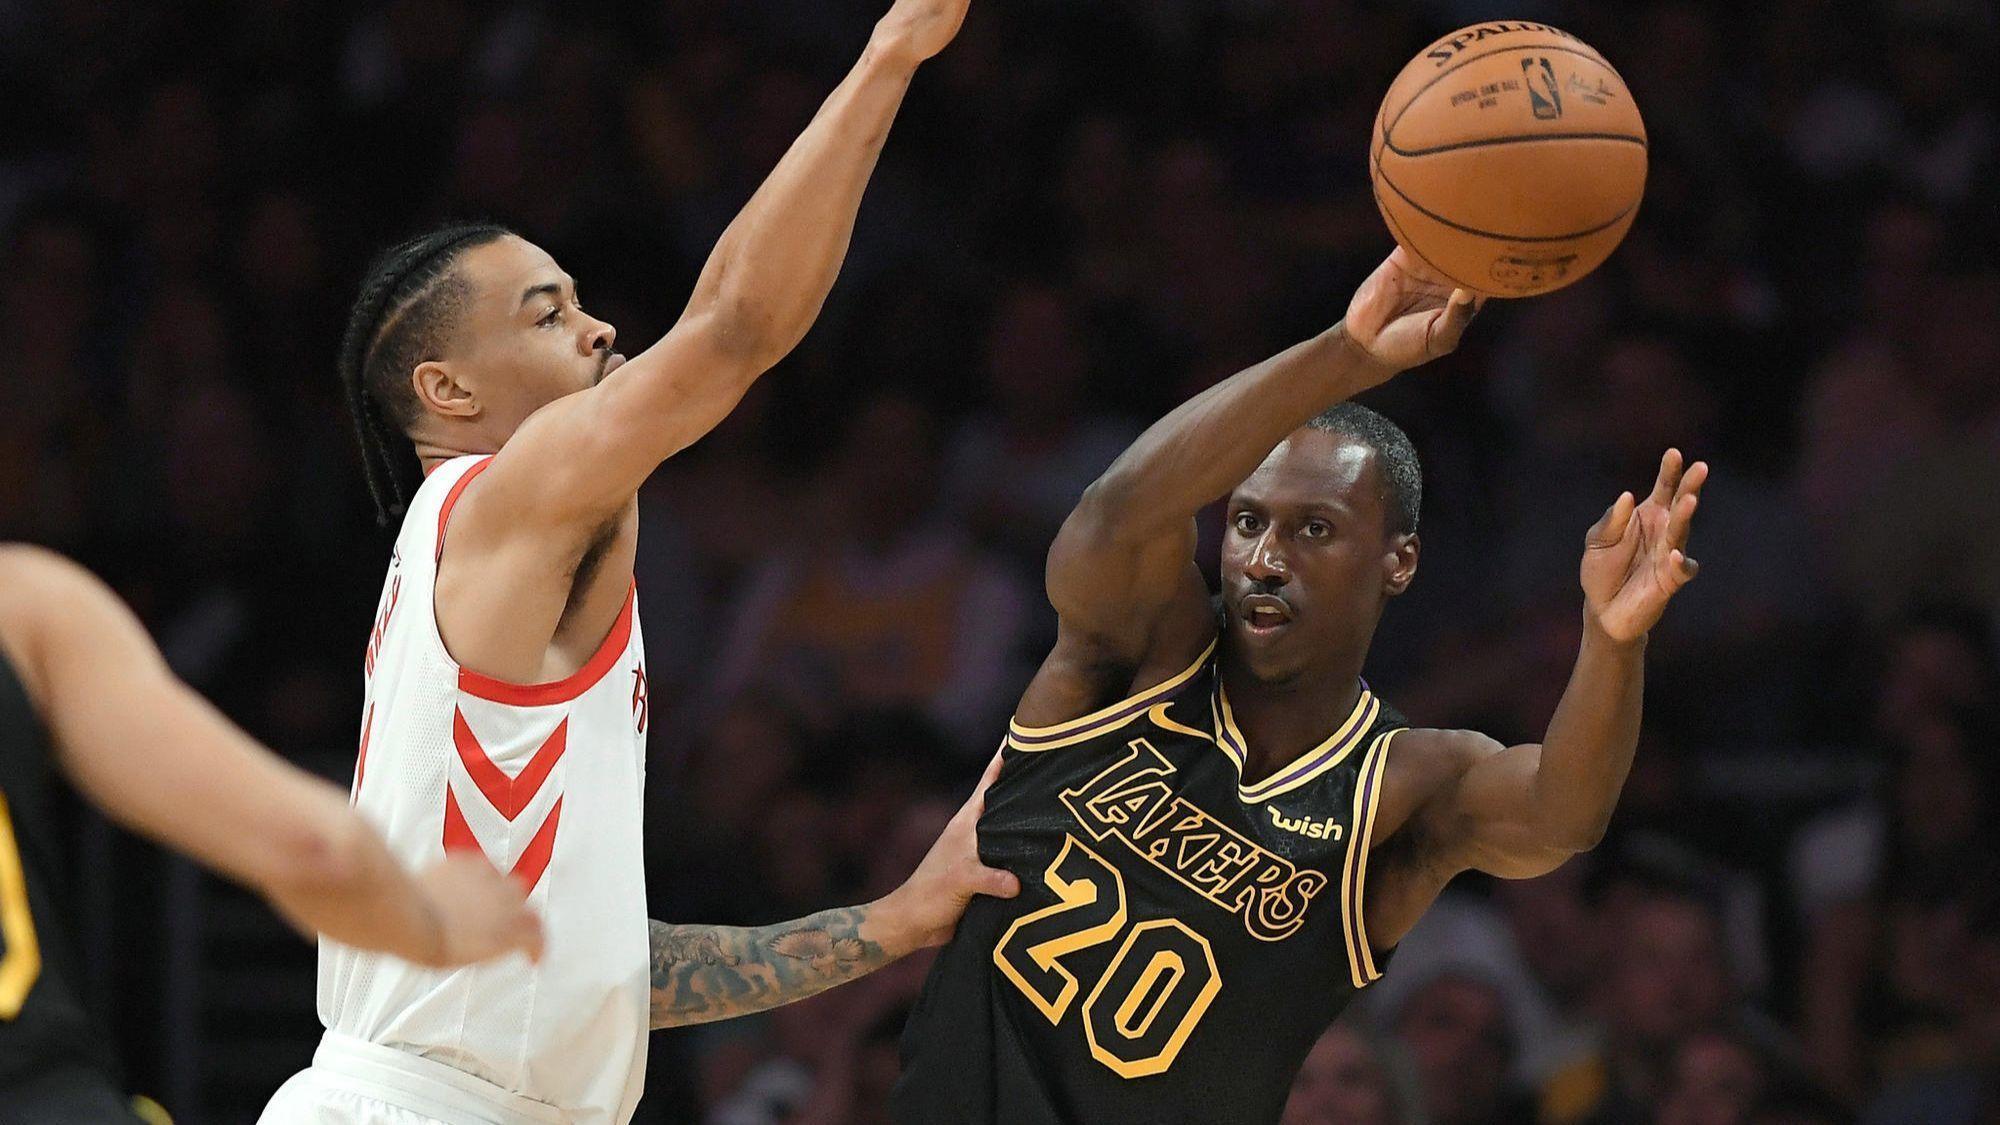 Andre Ingram's 15 minutes of NBA fame are over. His sense of purpose remains.